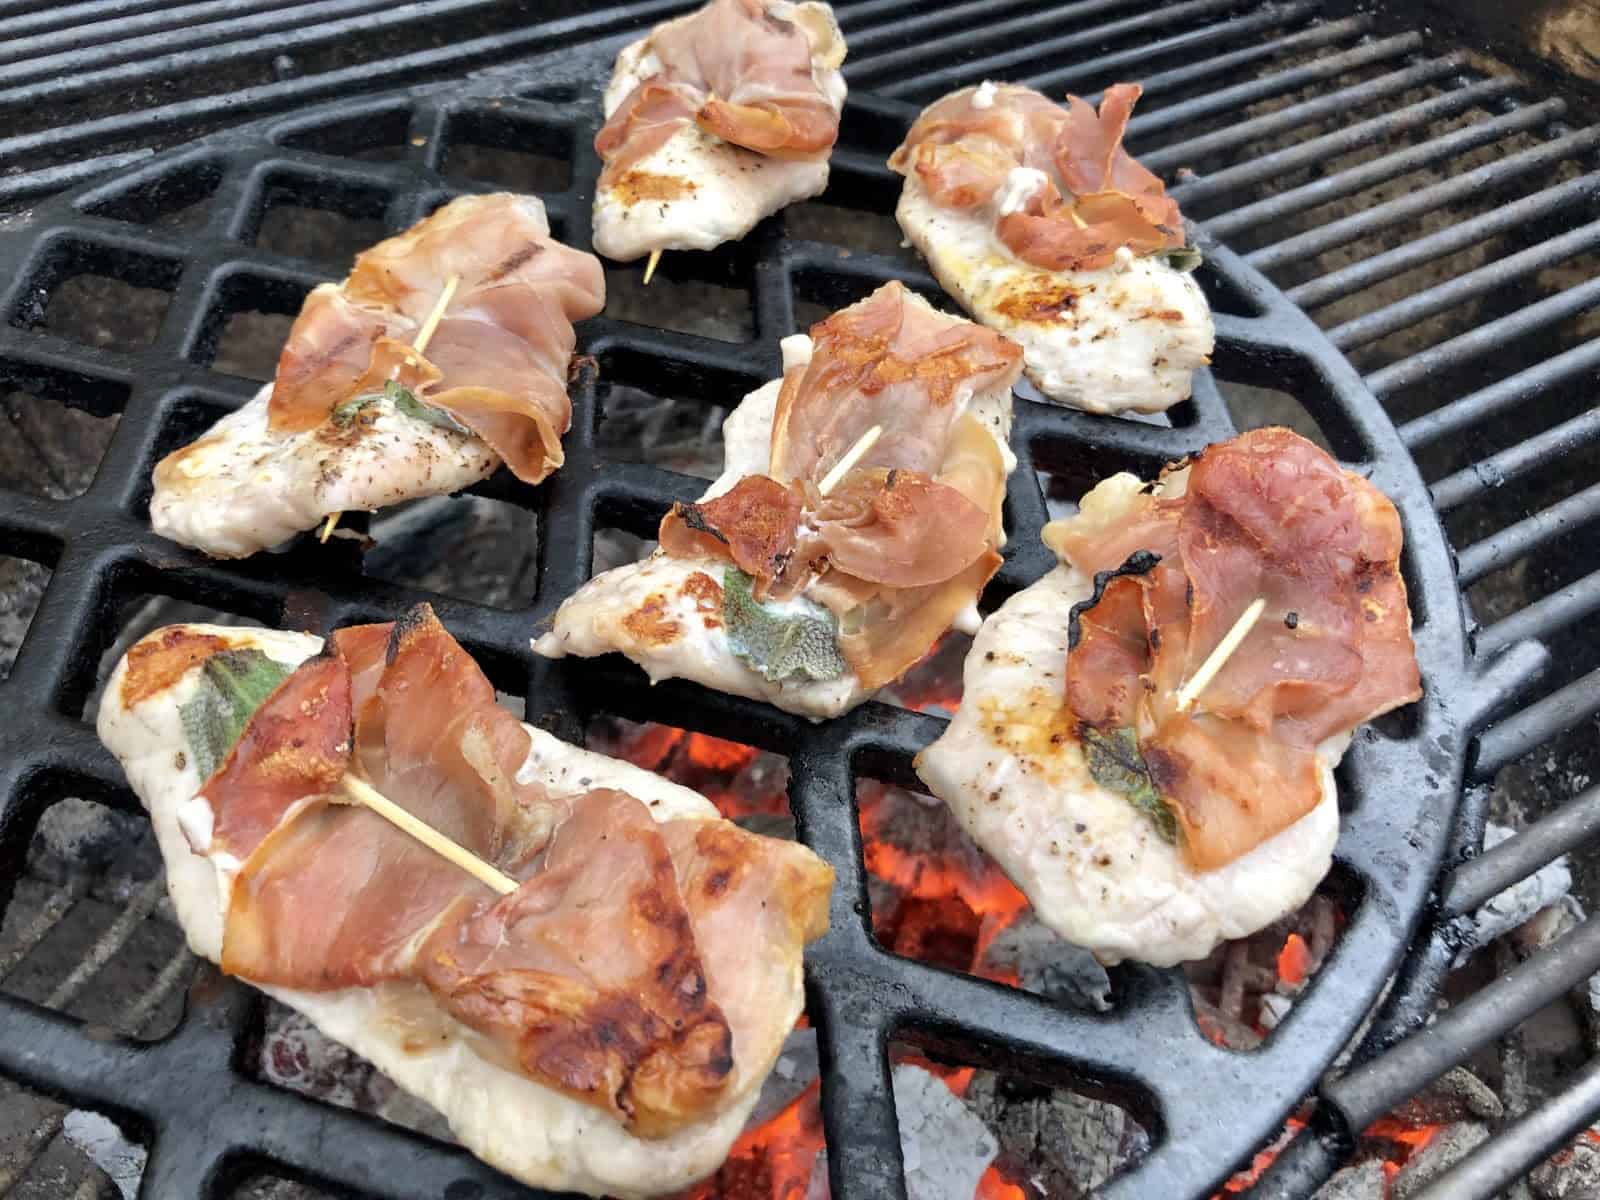 Saltimbocca cooking on the grill.